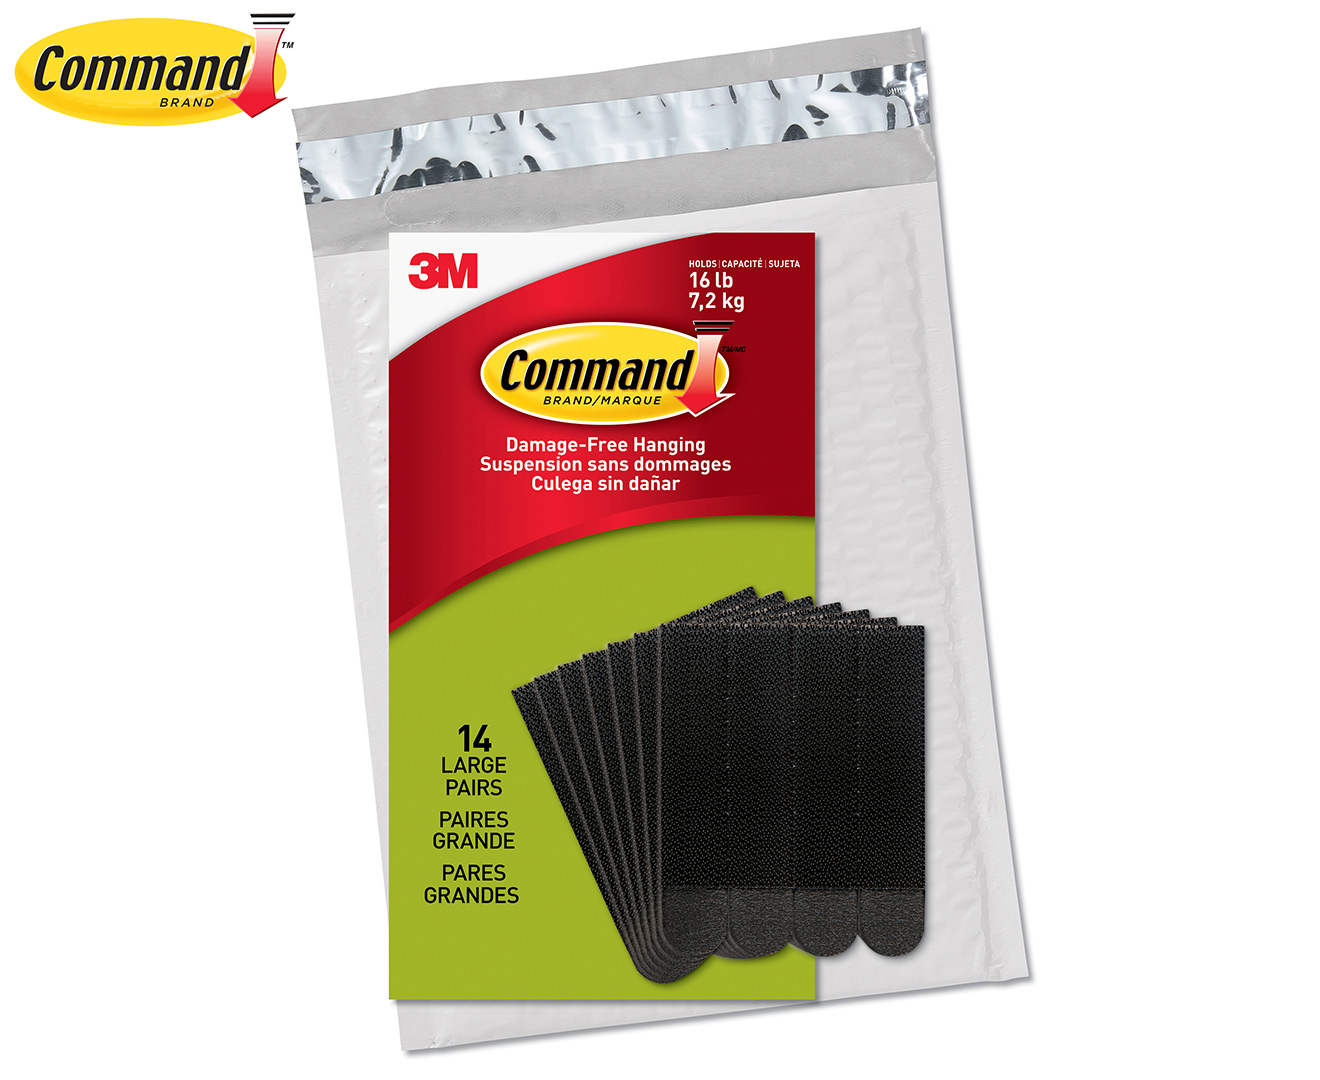 Command Large Adhesive Picture Hanging Double Strips 14-Pack - Black